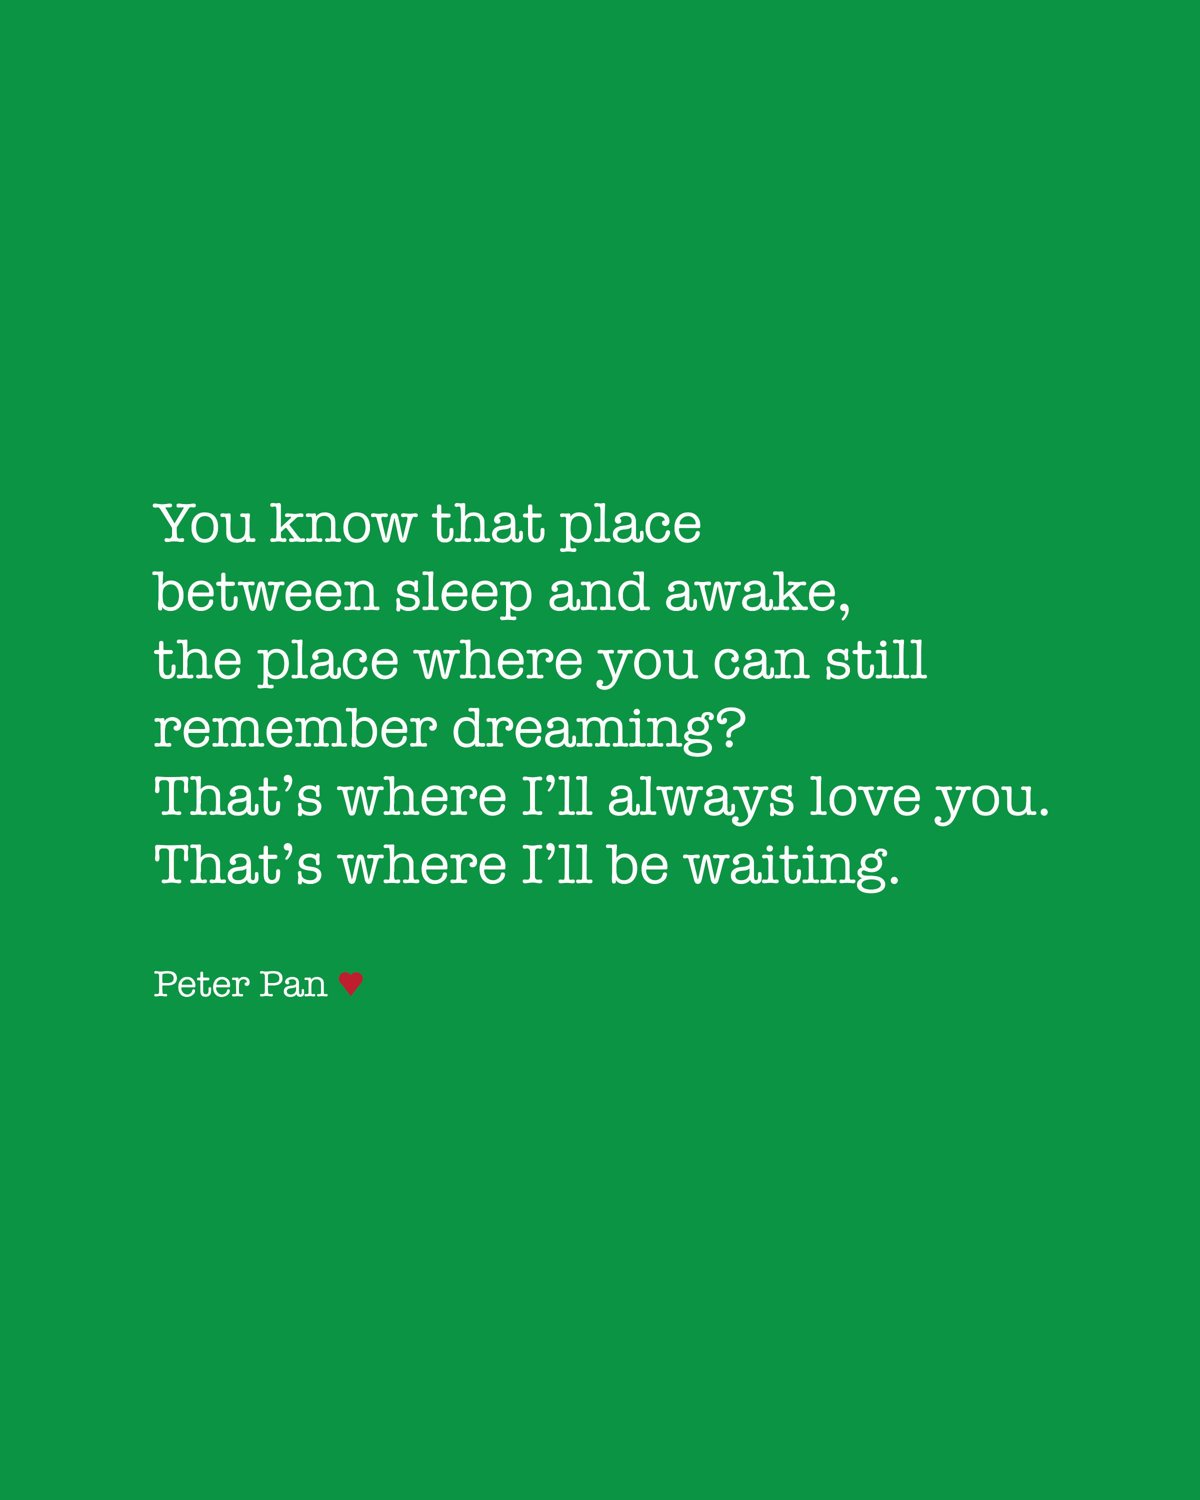 you know that place between sleep and awake quote